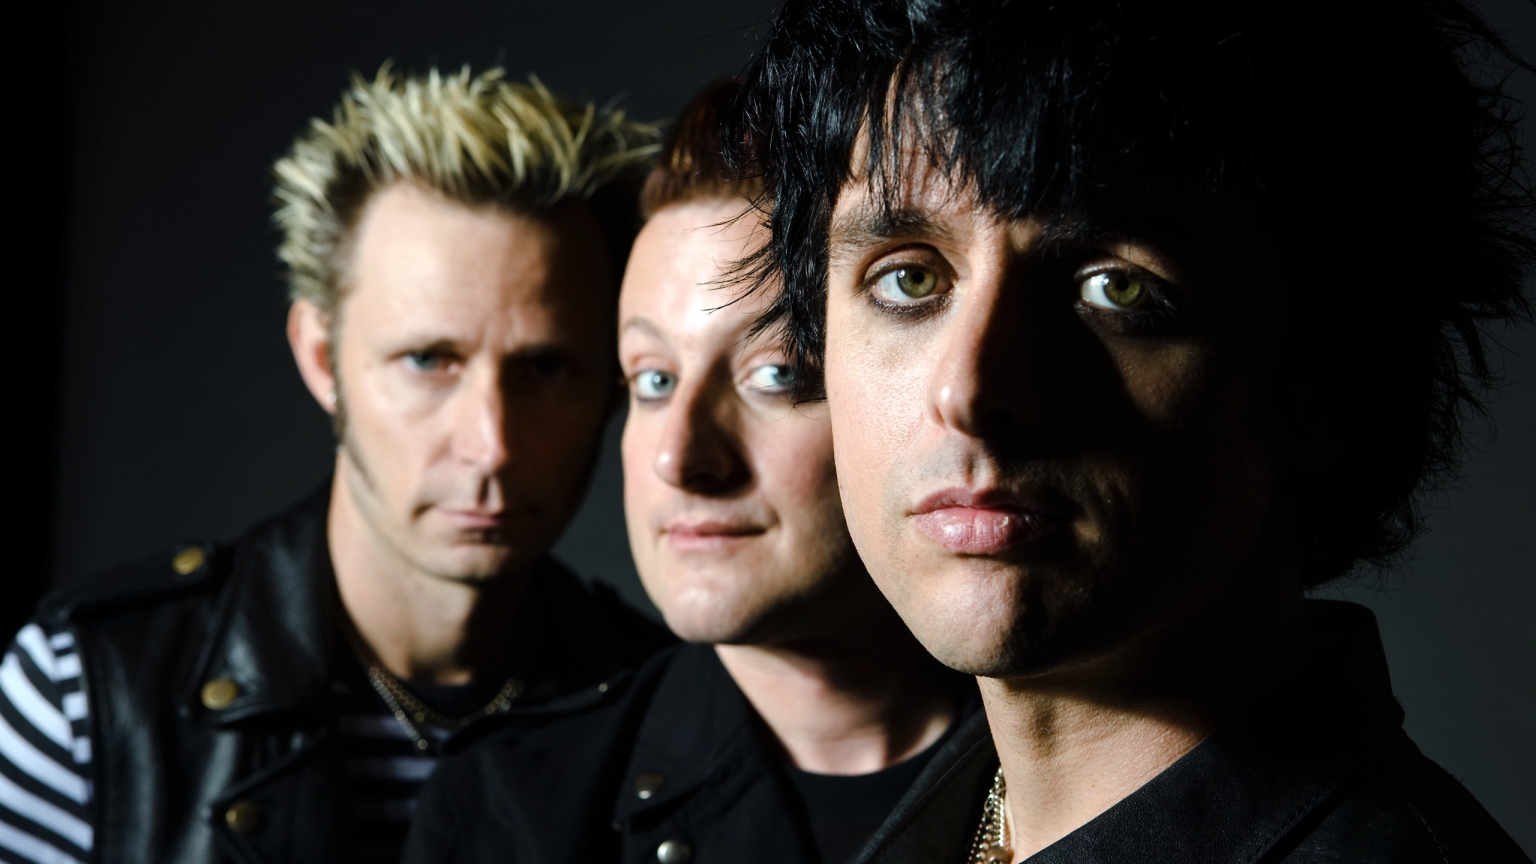 Green Day Band in Blak for 1536 x 864 HDTV resolution